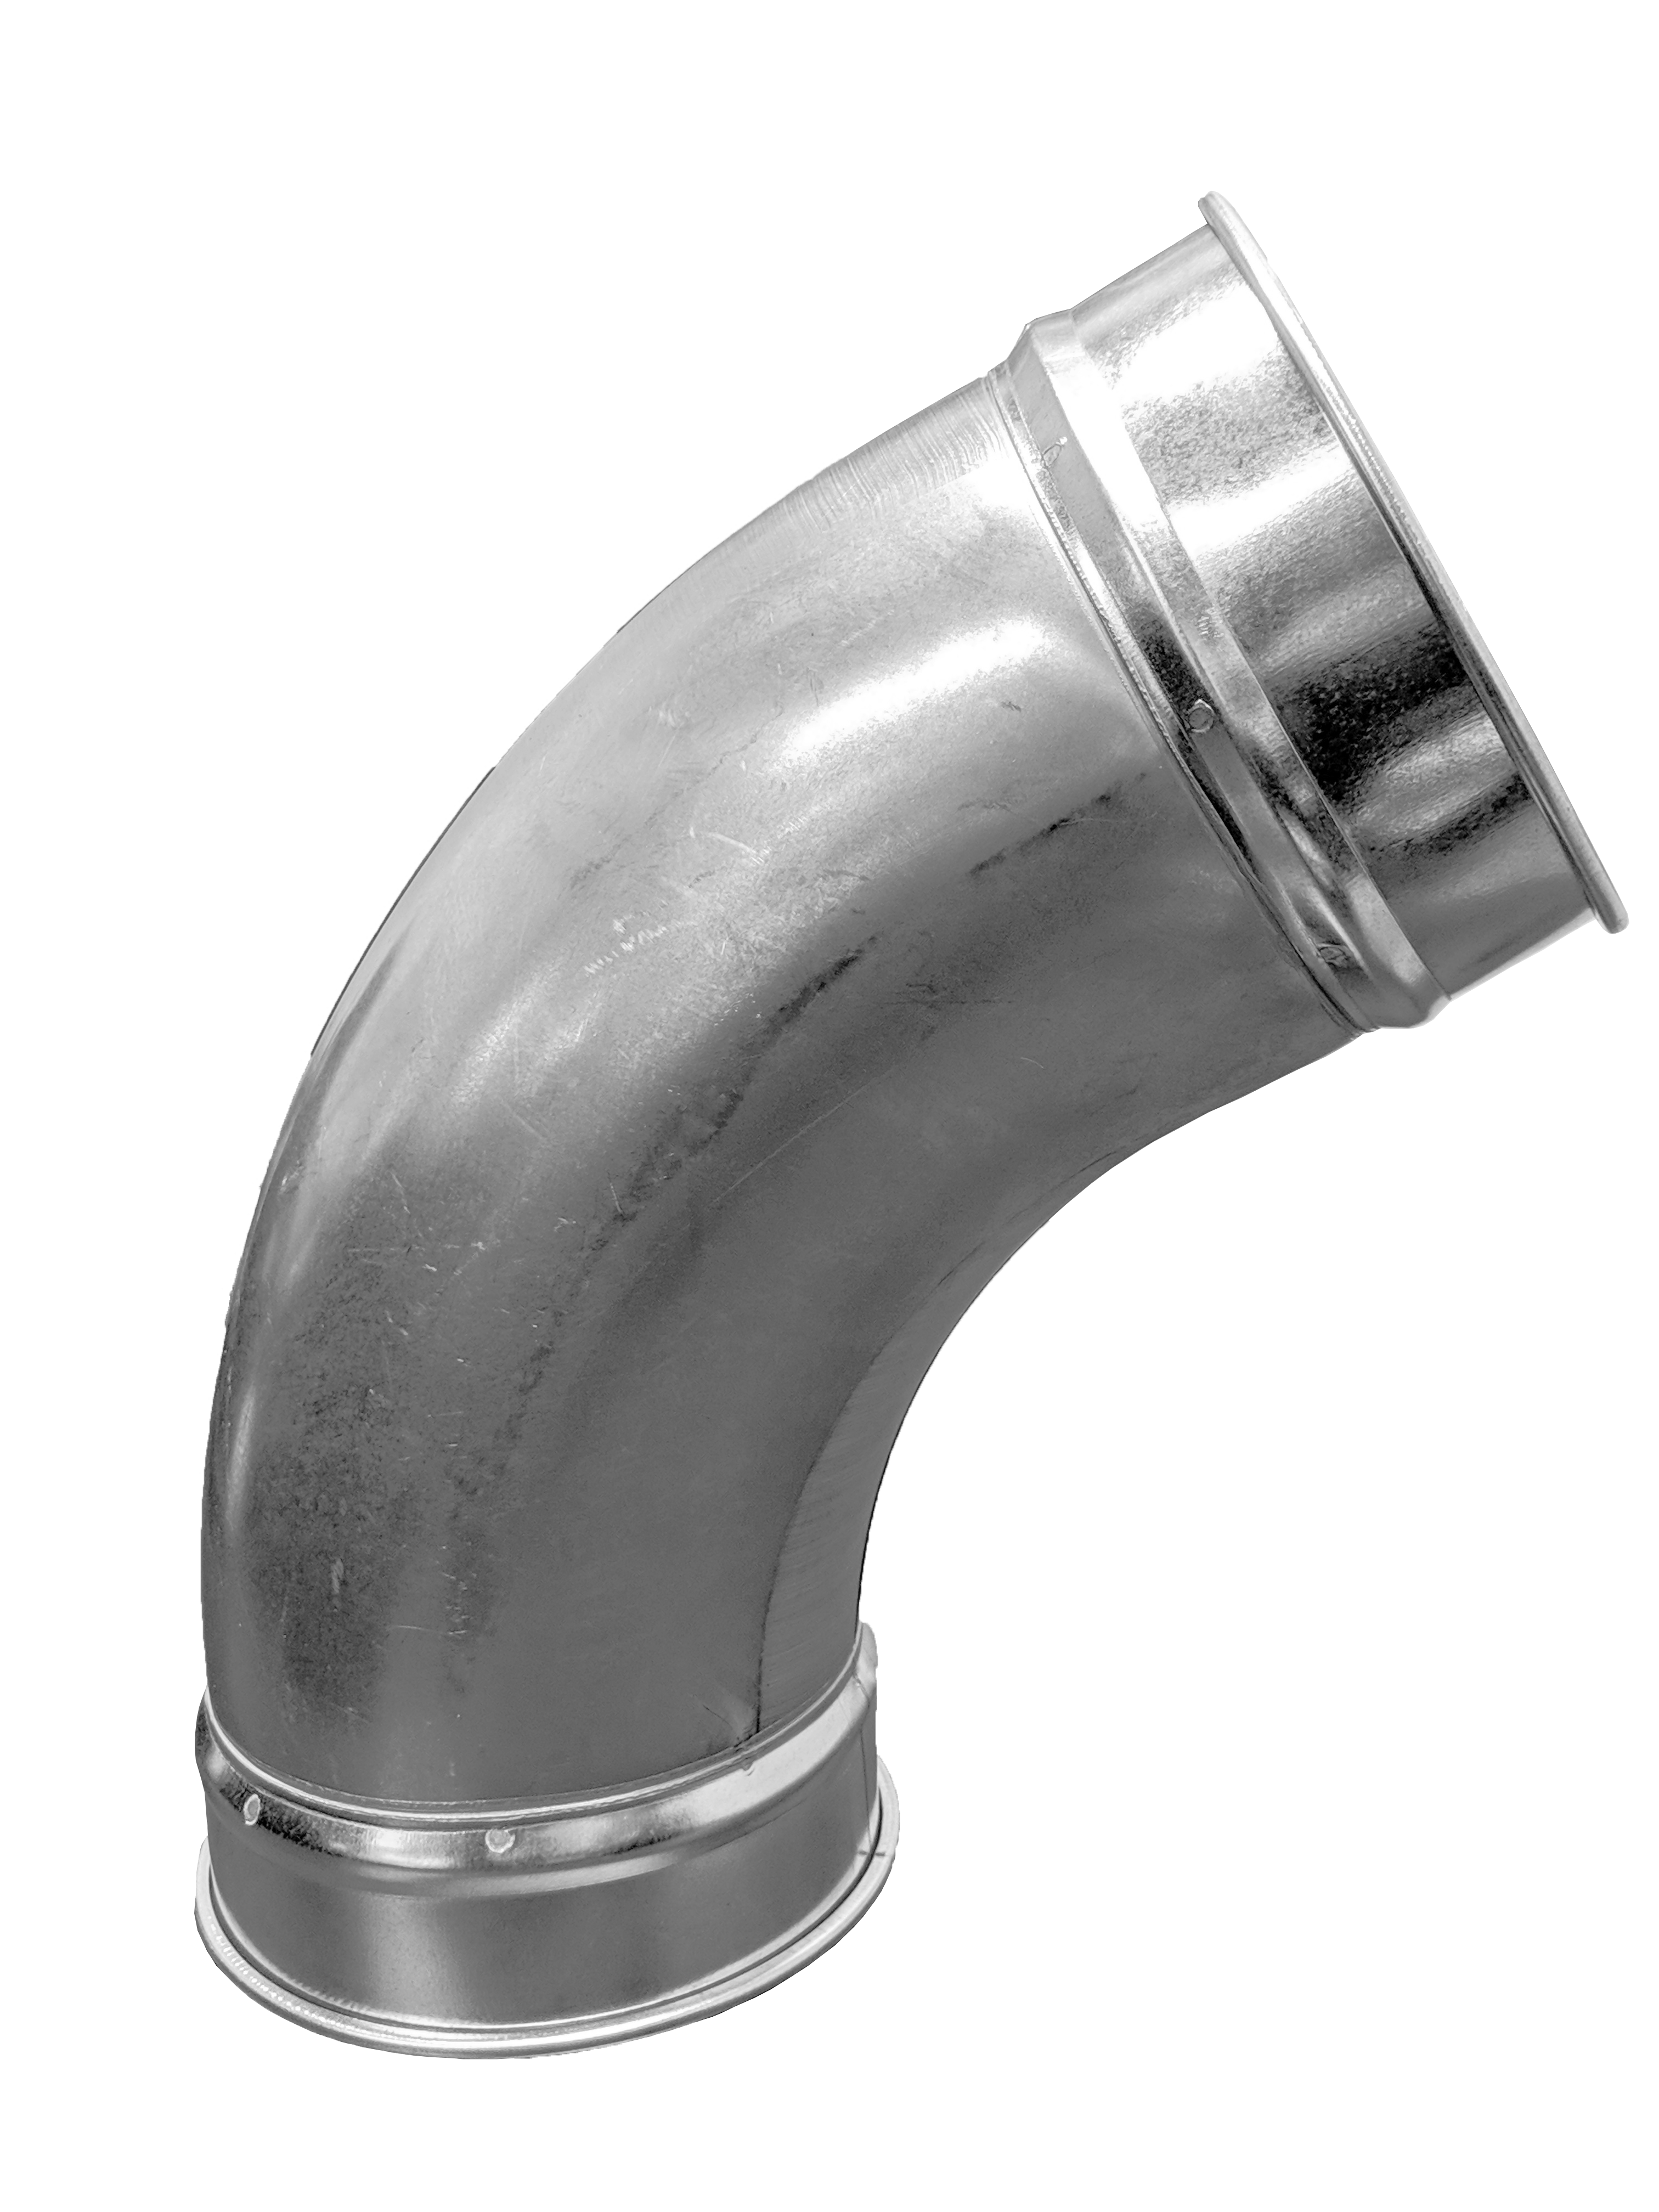 Ham-let Male Elbow 12mm x 1/8" NPT Stainless Steel Fitting 769LSS12MMX1/8 